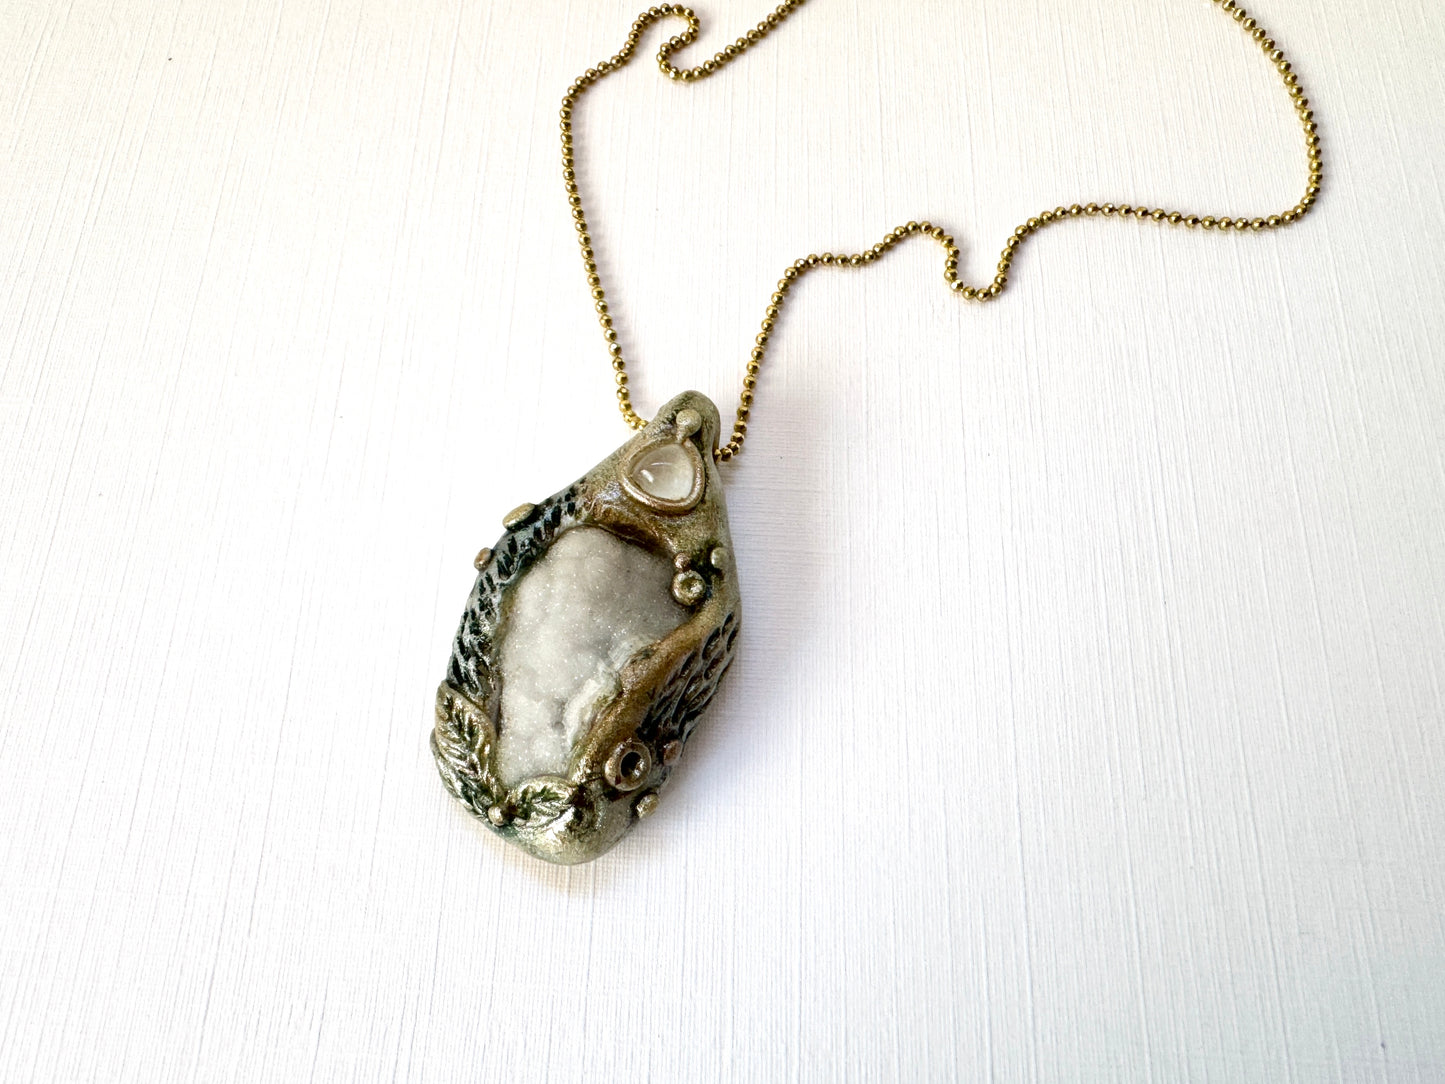 Shimmering Woodland Necklace - Chalcedony, Quartz and Moonstone